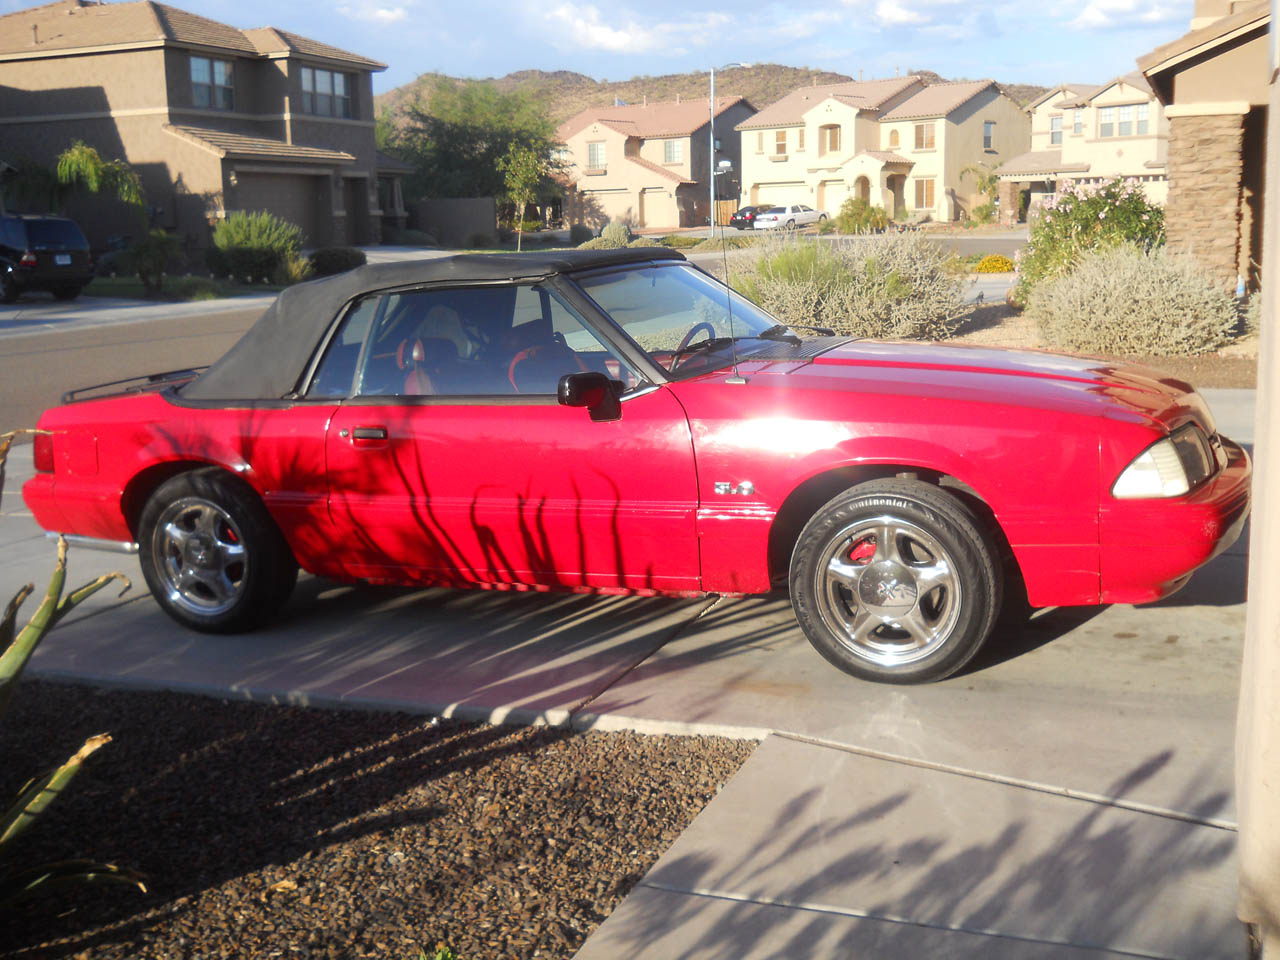  1992 Ford Mustang LX convertible